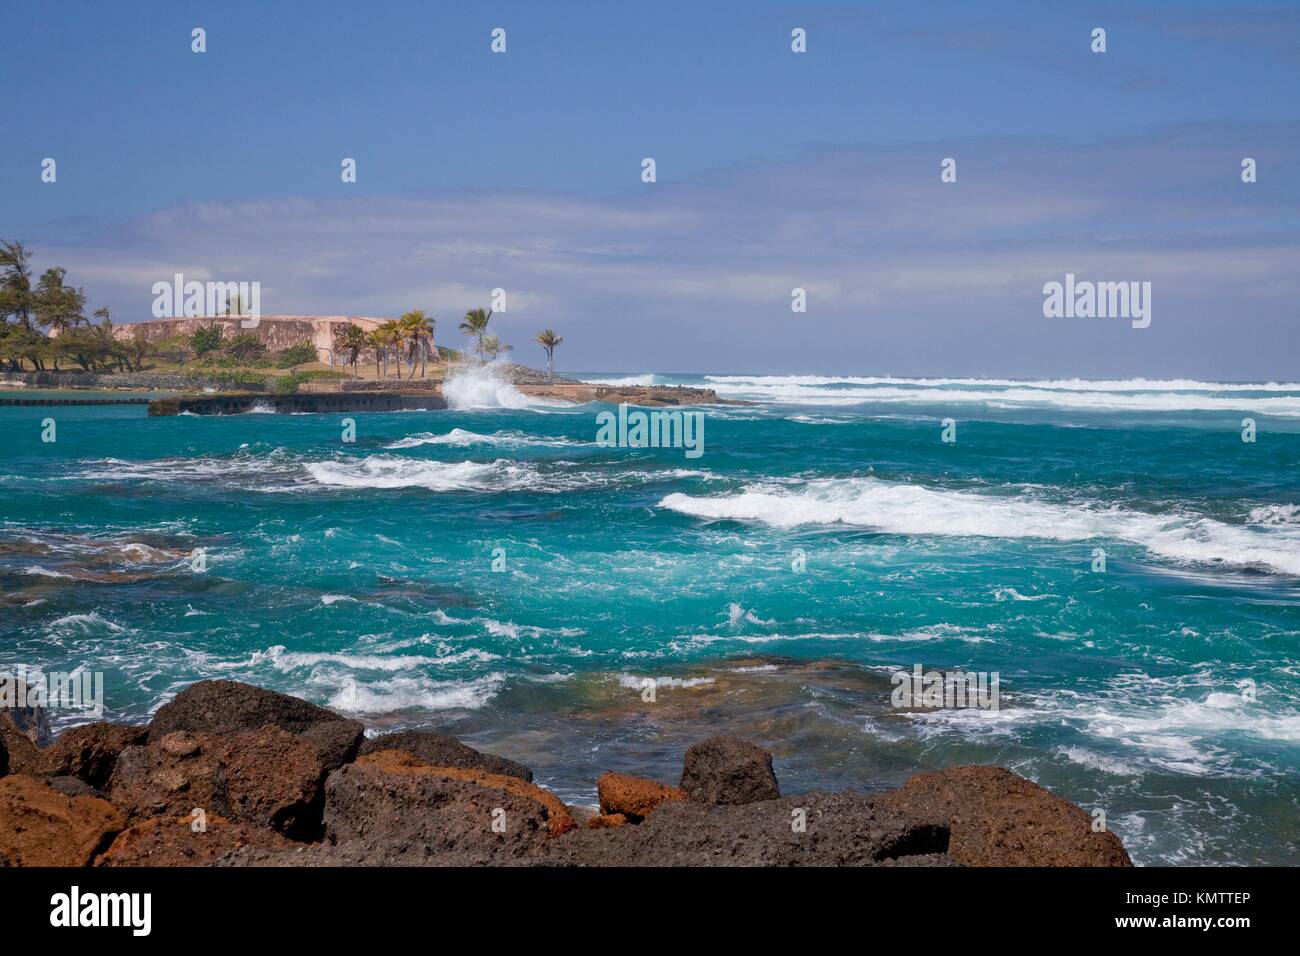 Waves and surf at the Caribbean Sea beach at the Caribe Hilton Stock Photo  - Alamy